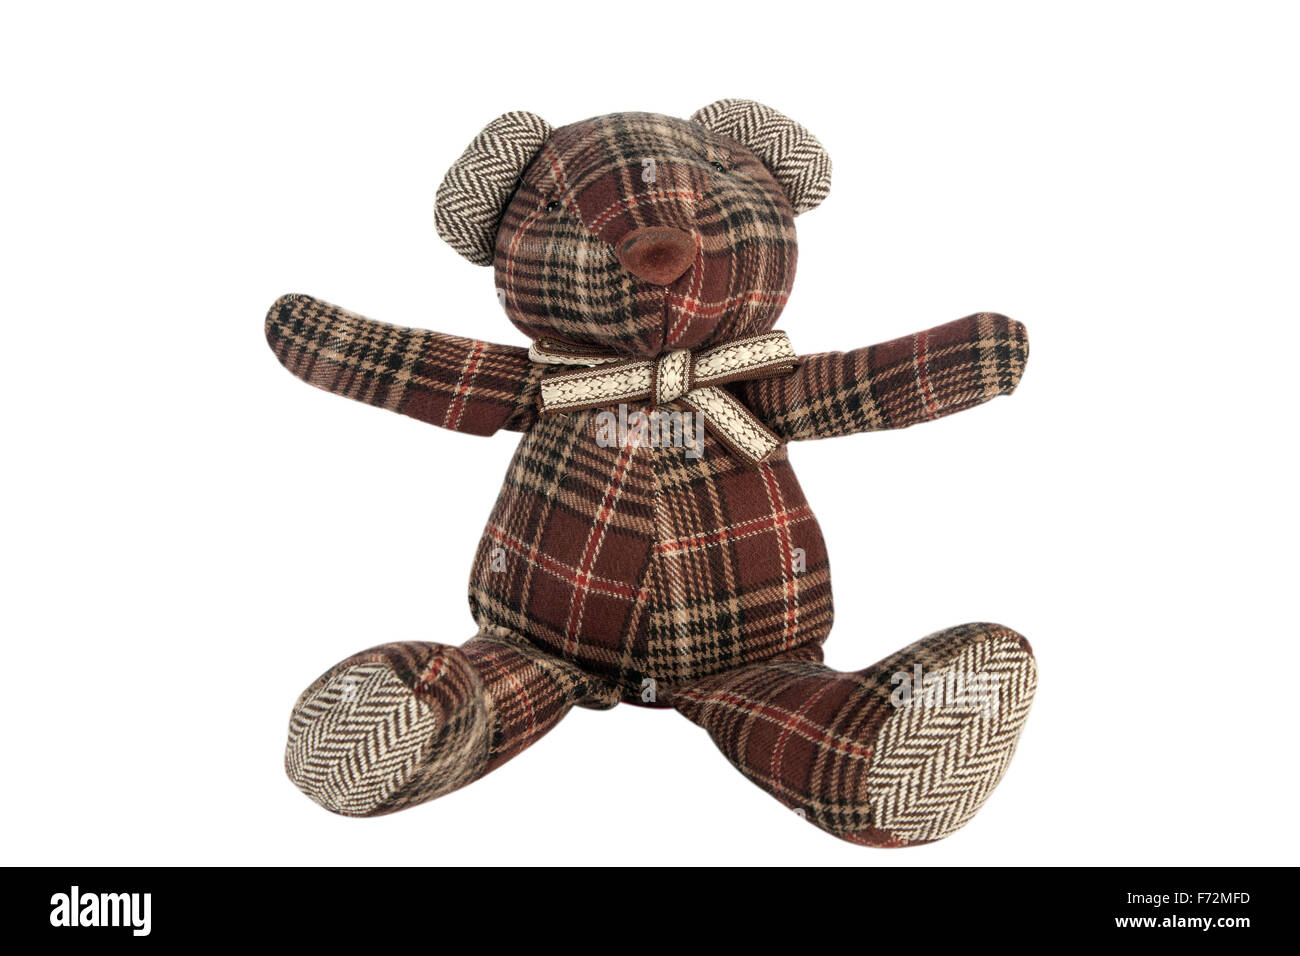 Teddy Bear toy isolated on white, Pattern Fabric Stock Photo